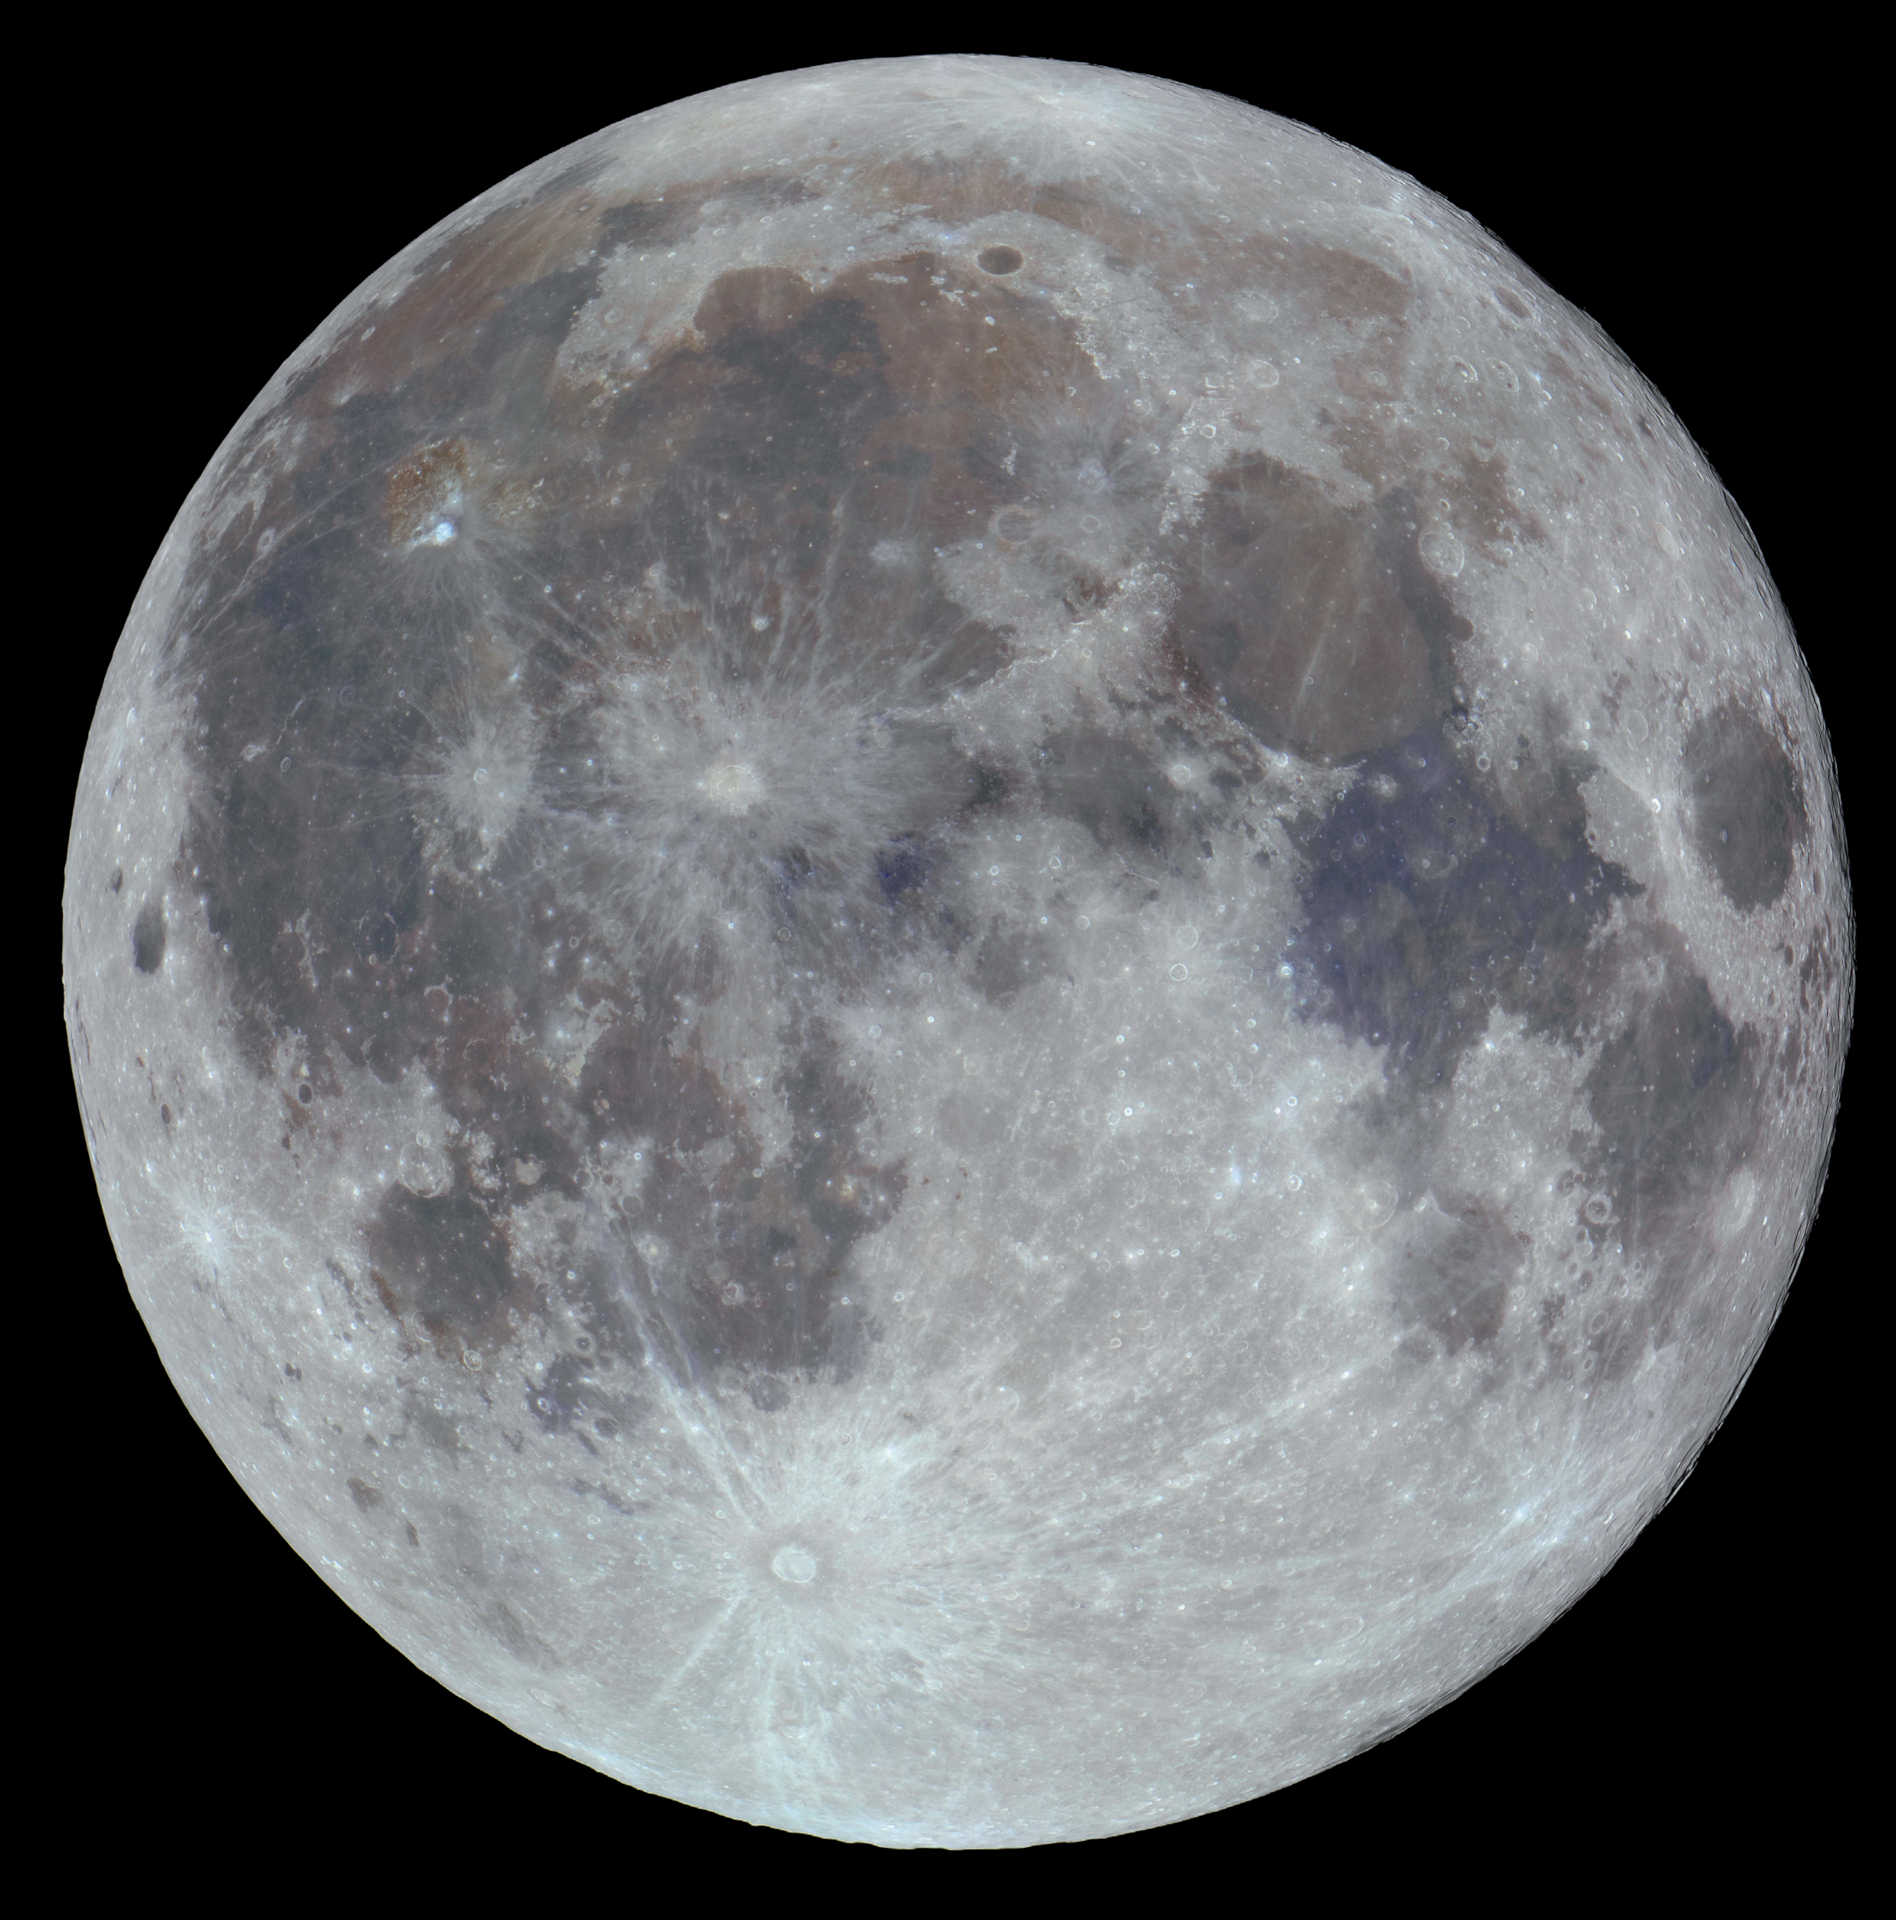 At full Moon, lunar mare, highlands, and ray systems are visible in their entirety. Rolf Hempel